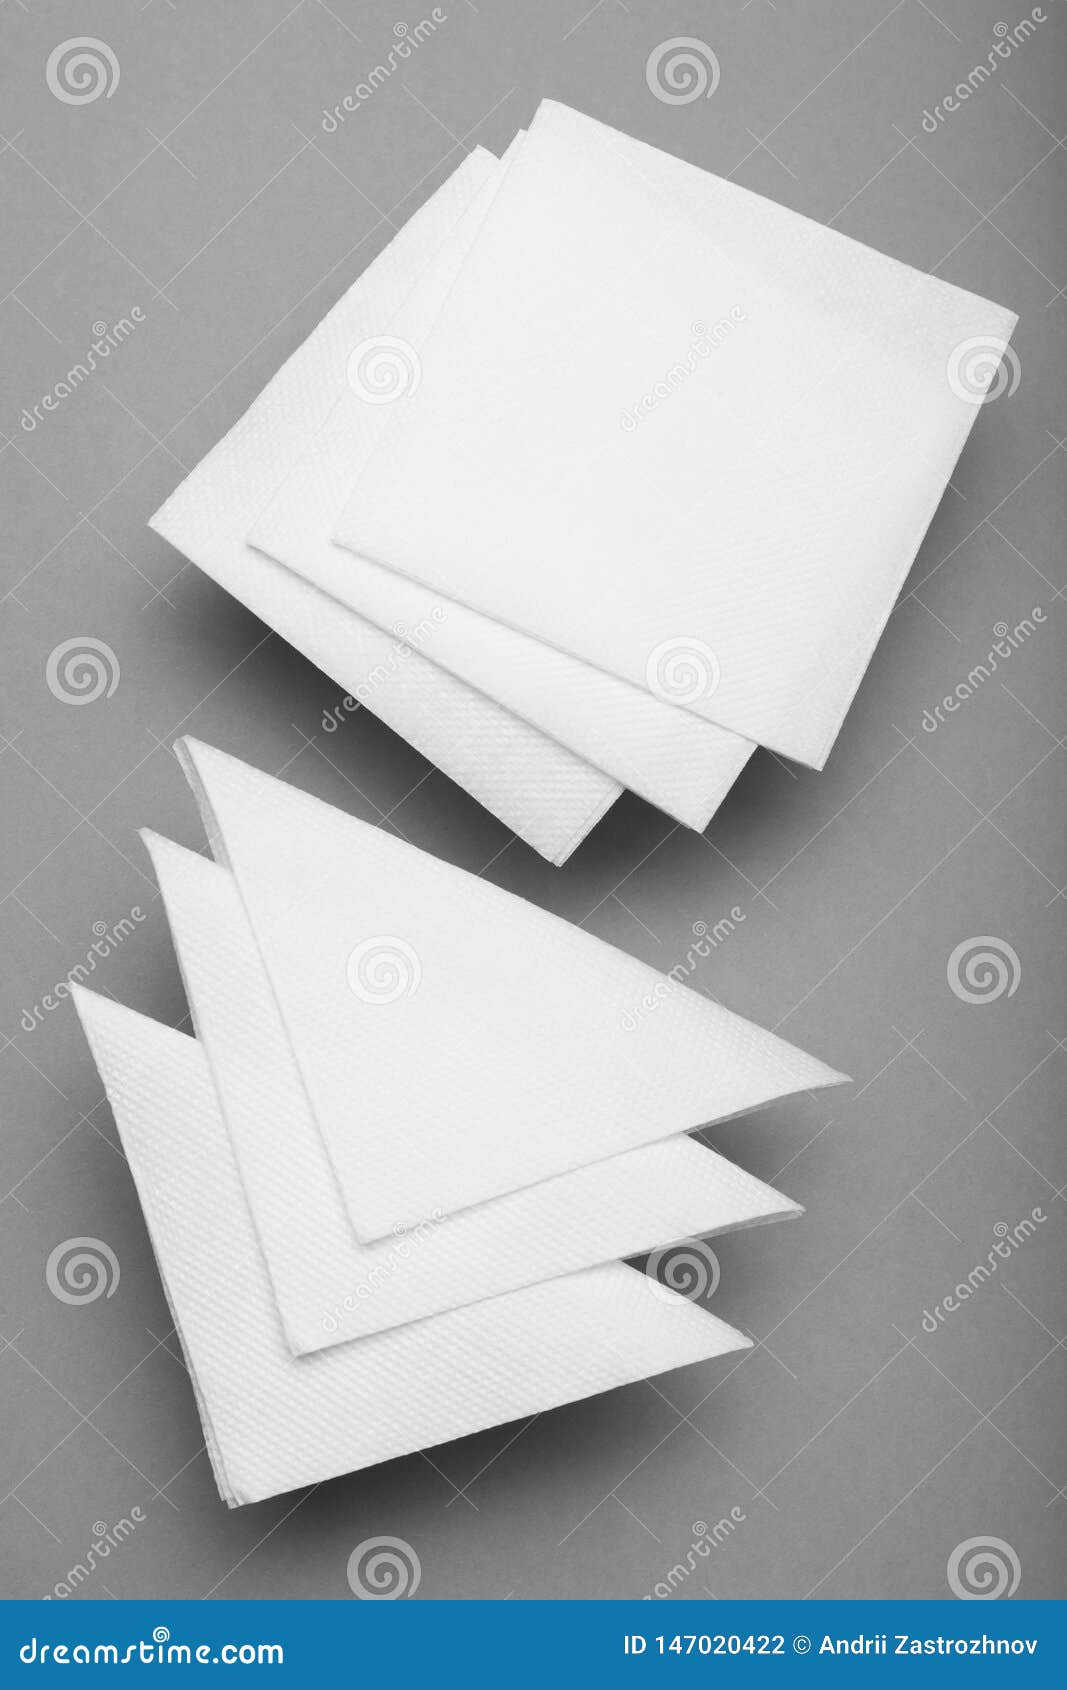 Download White Paper Restaurant Napkin Mockup Stock Photo - Image of catering, blank: 147020422